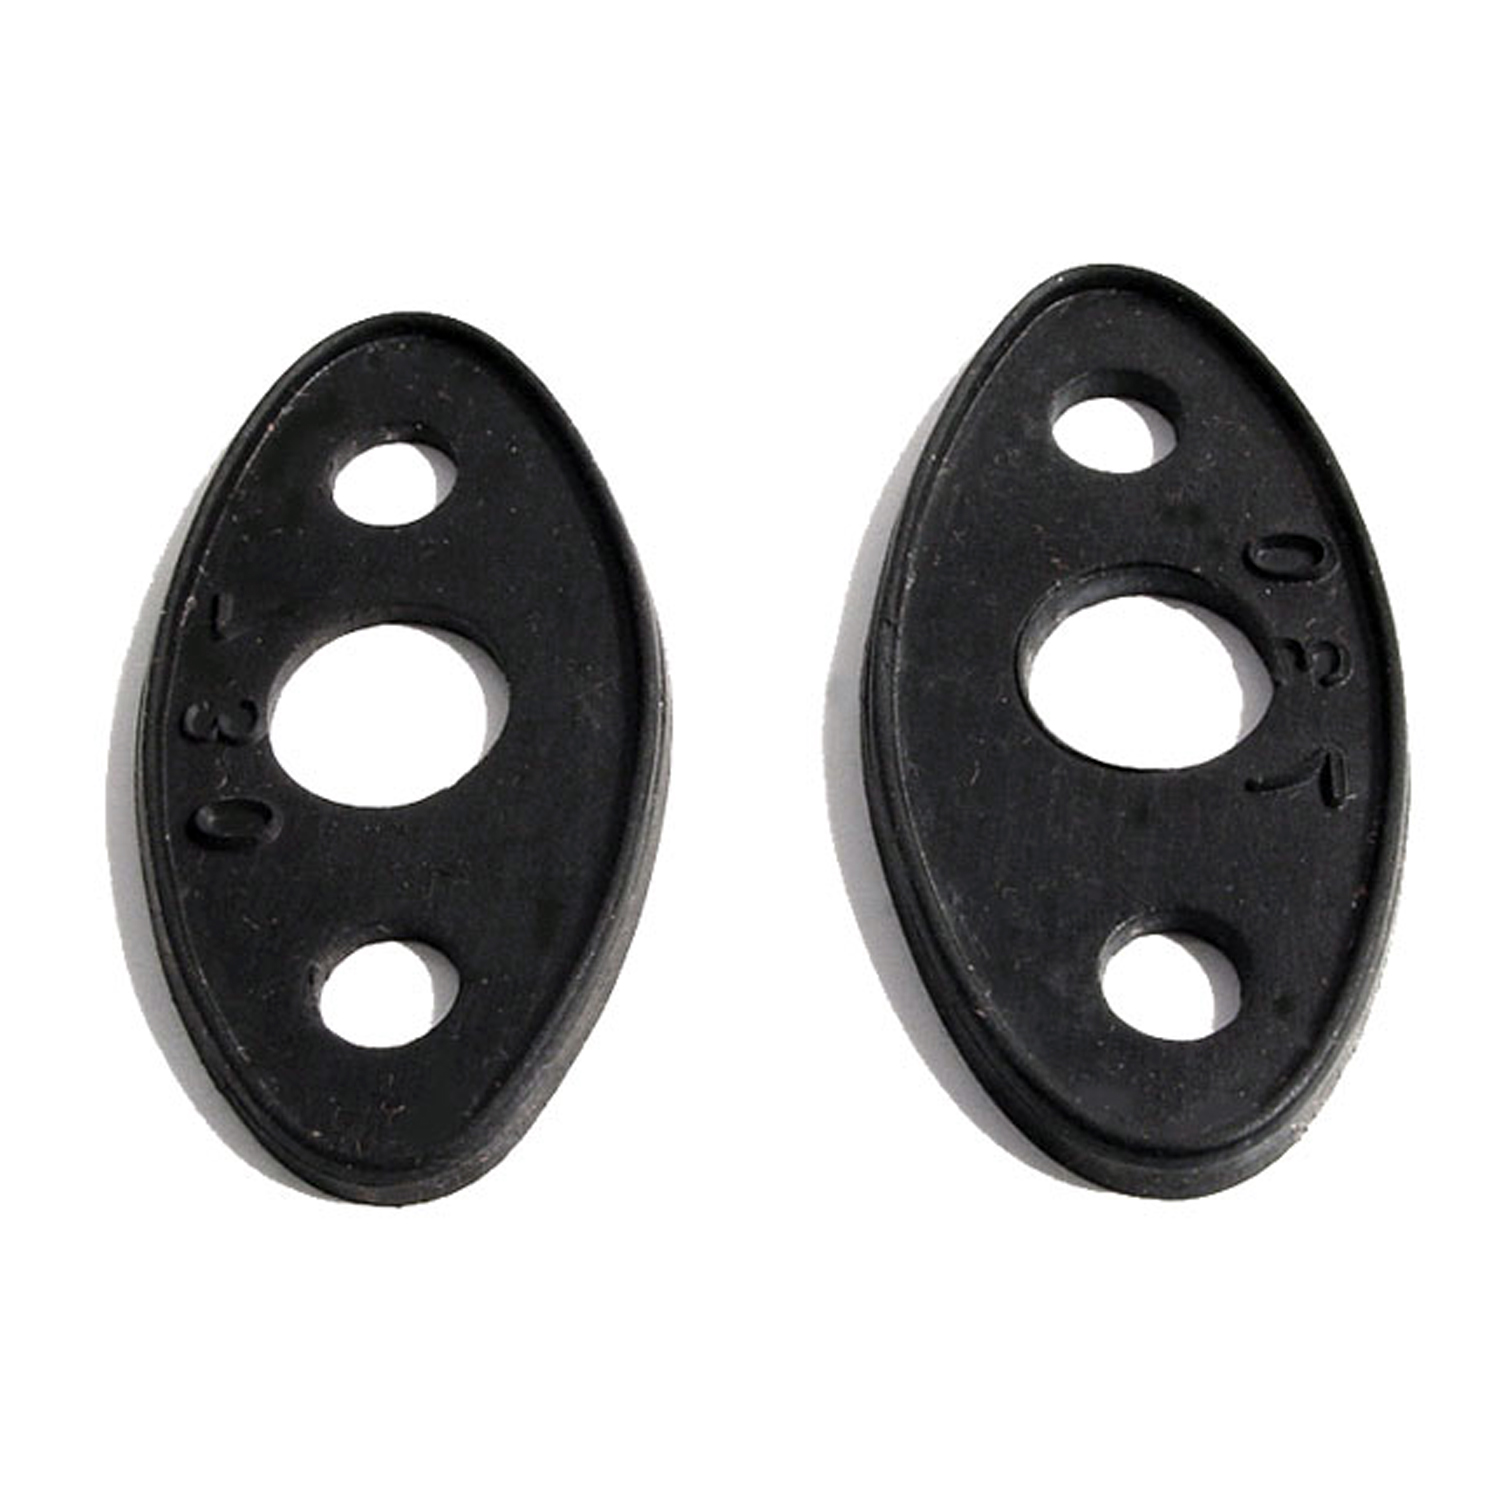 1935 Ford Model 48 Door Handle Pads.  1-3/8 wide X 2-5/8 long.  Pair-MP 730